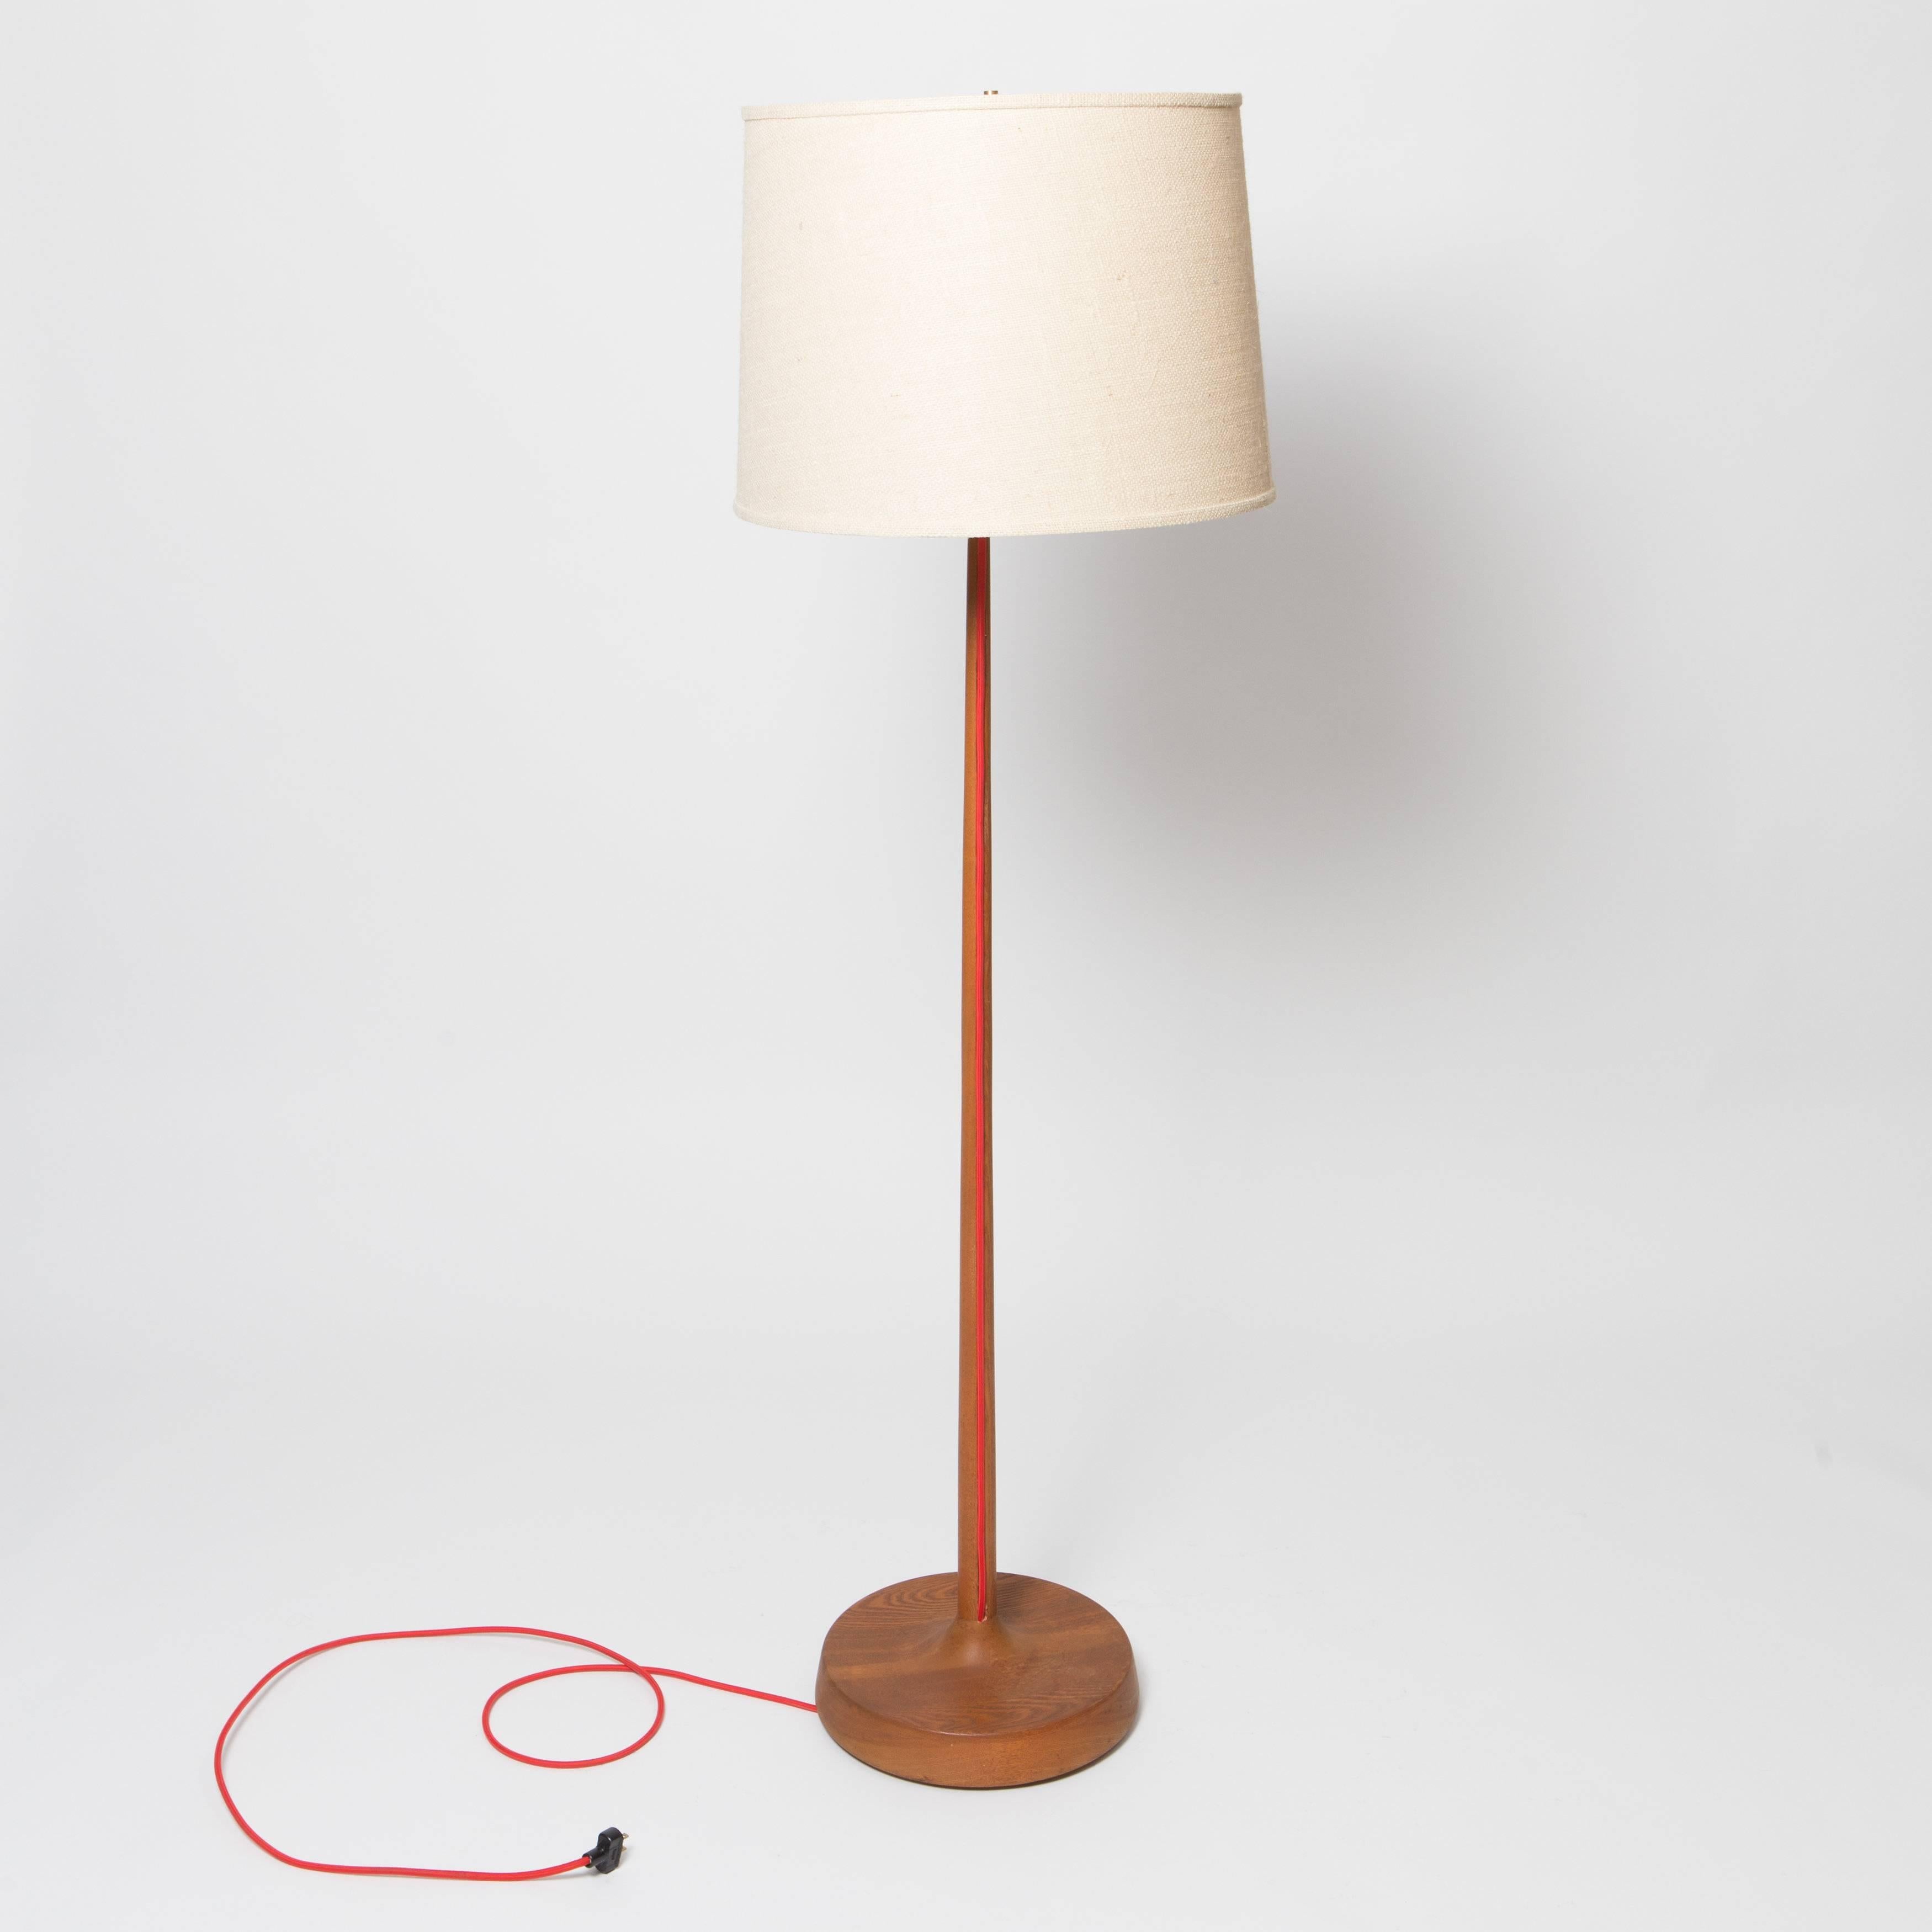 1950s solid oak floor lamp with exposed fabric cord.  Two lamps available-one with original rope shade and the other a contemporary burlap shade.  Diameter below is for the base.